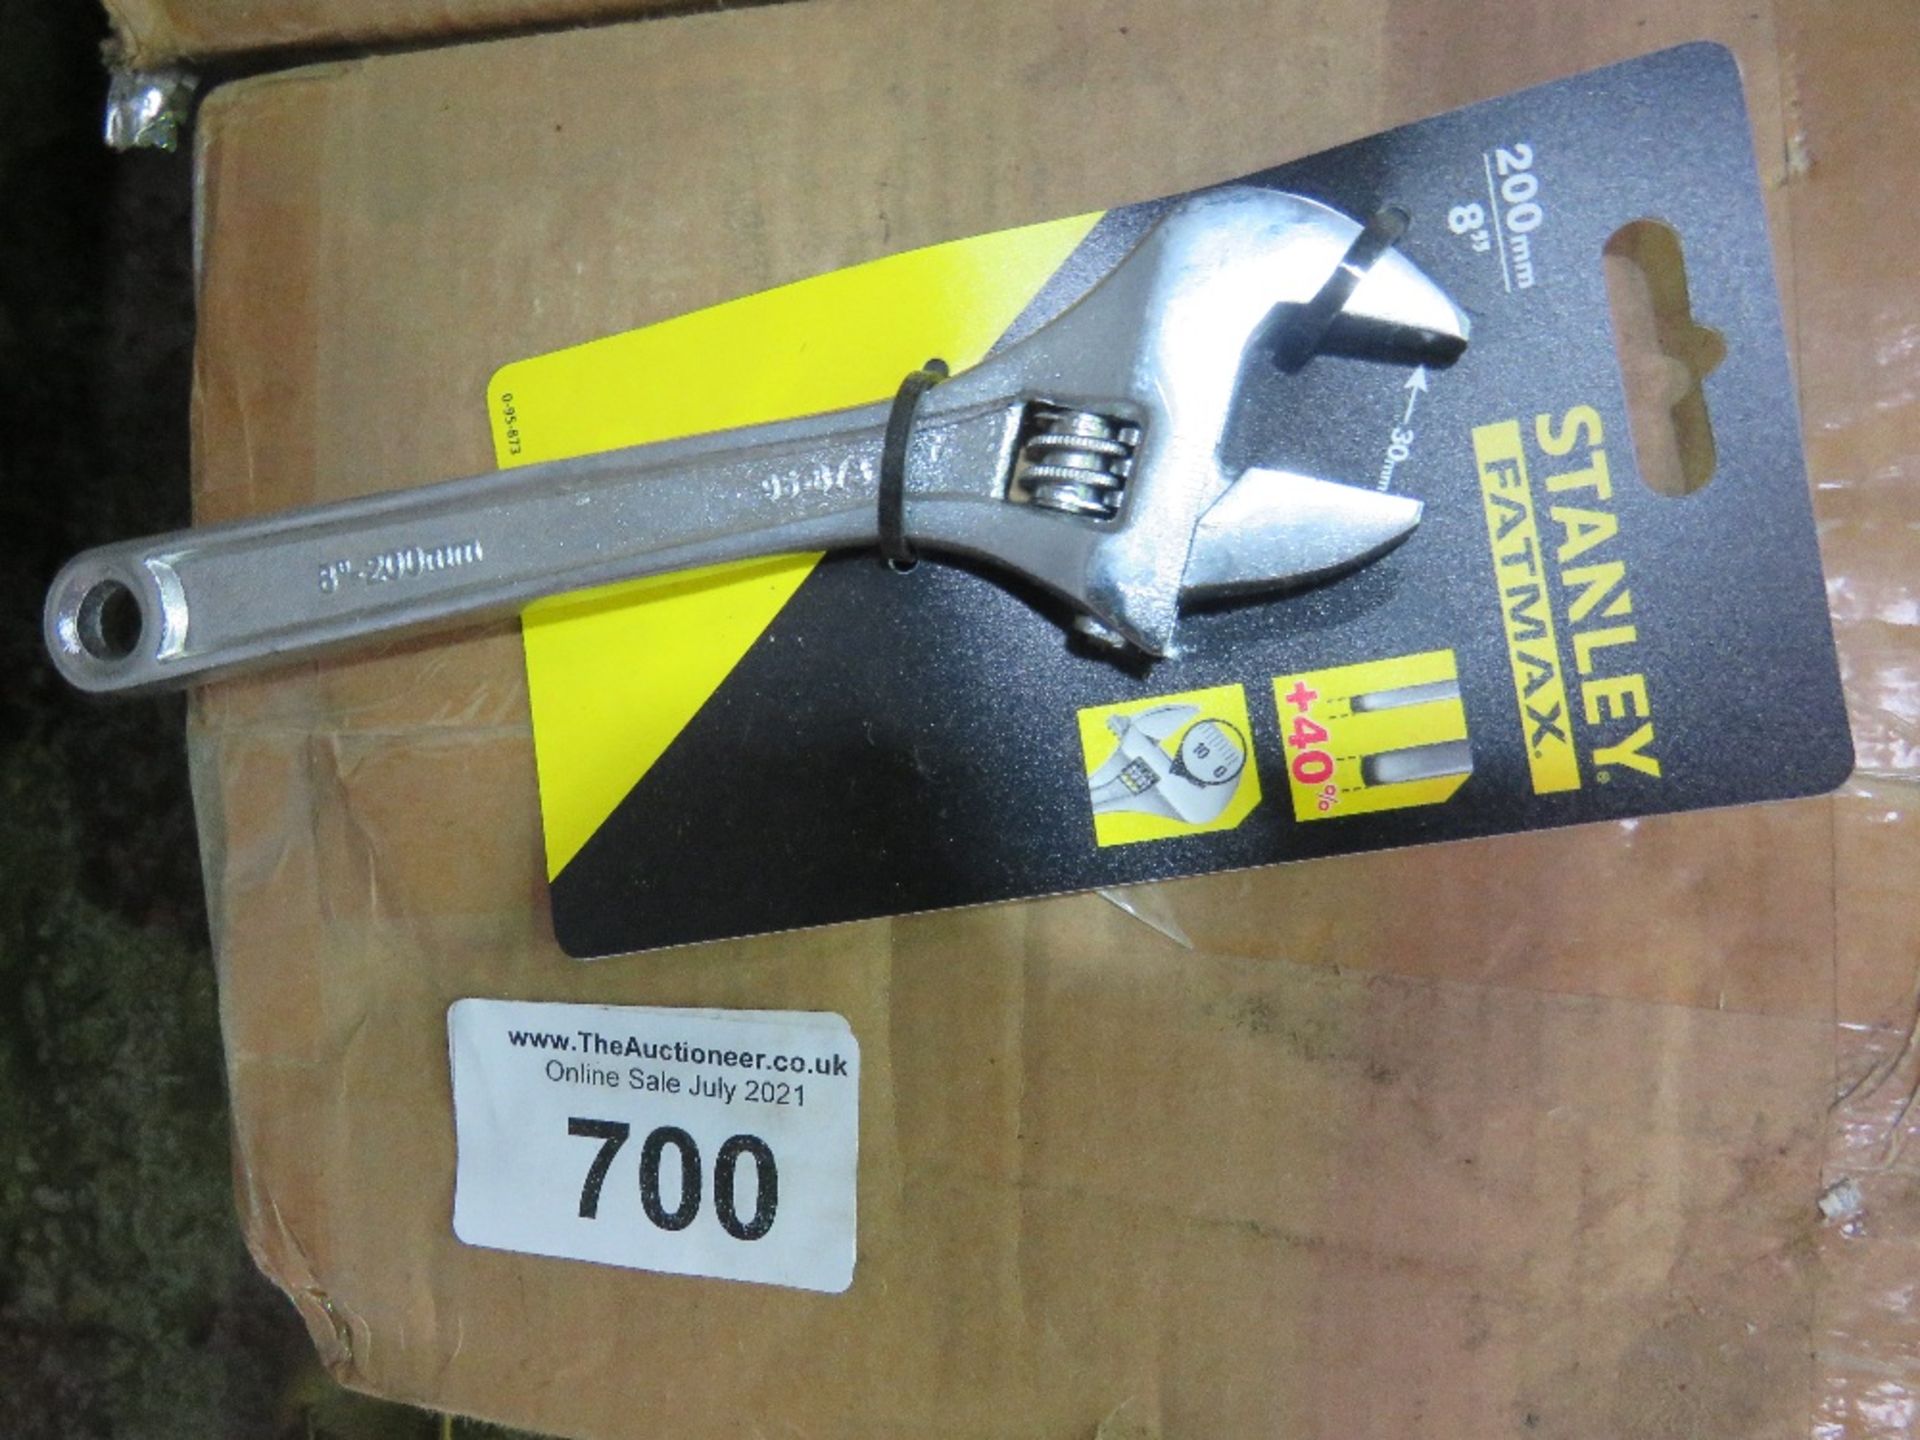 BOX OF 24 X STANLEY FATMAX 200MM ADJUSTABLE WRENCH SPANNERS.